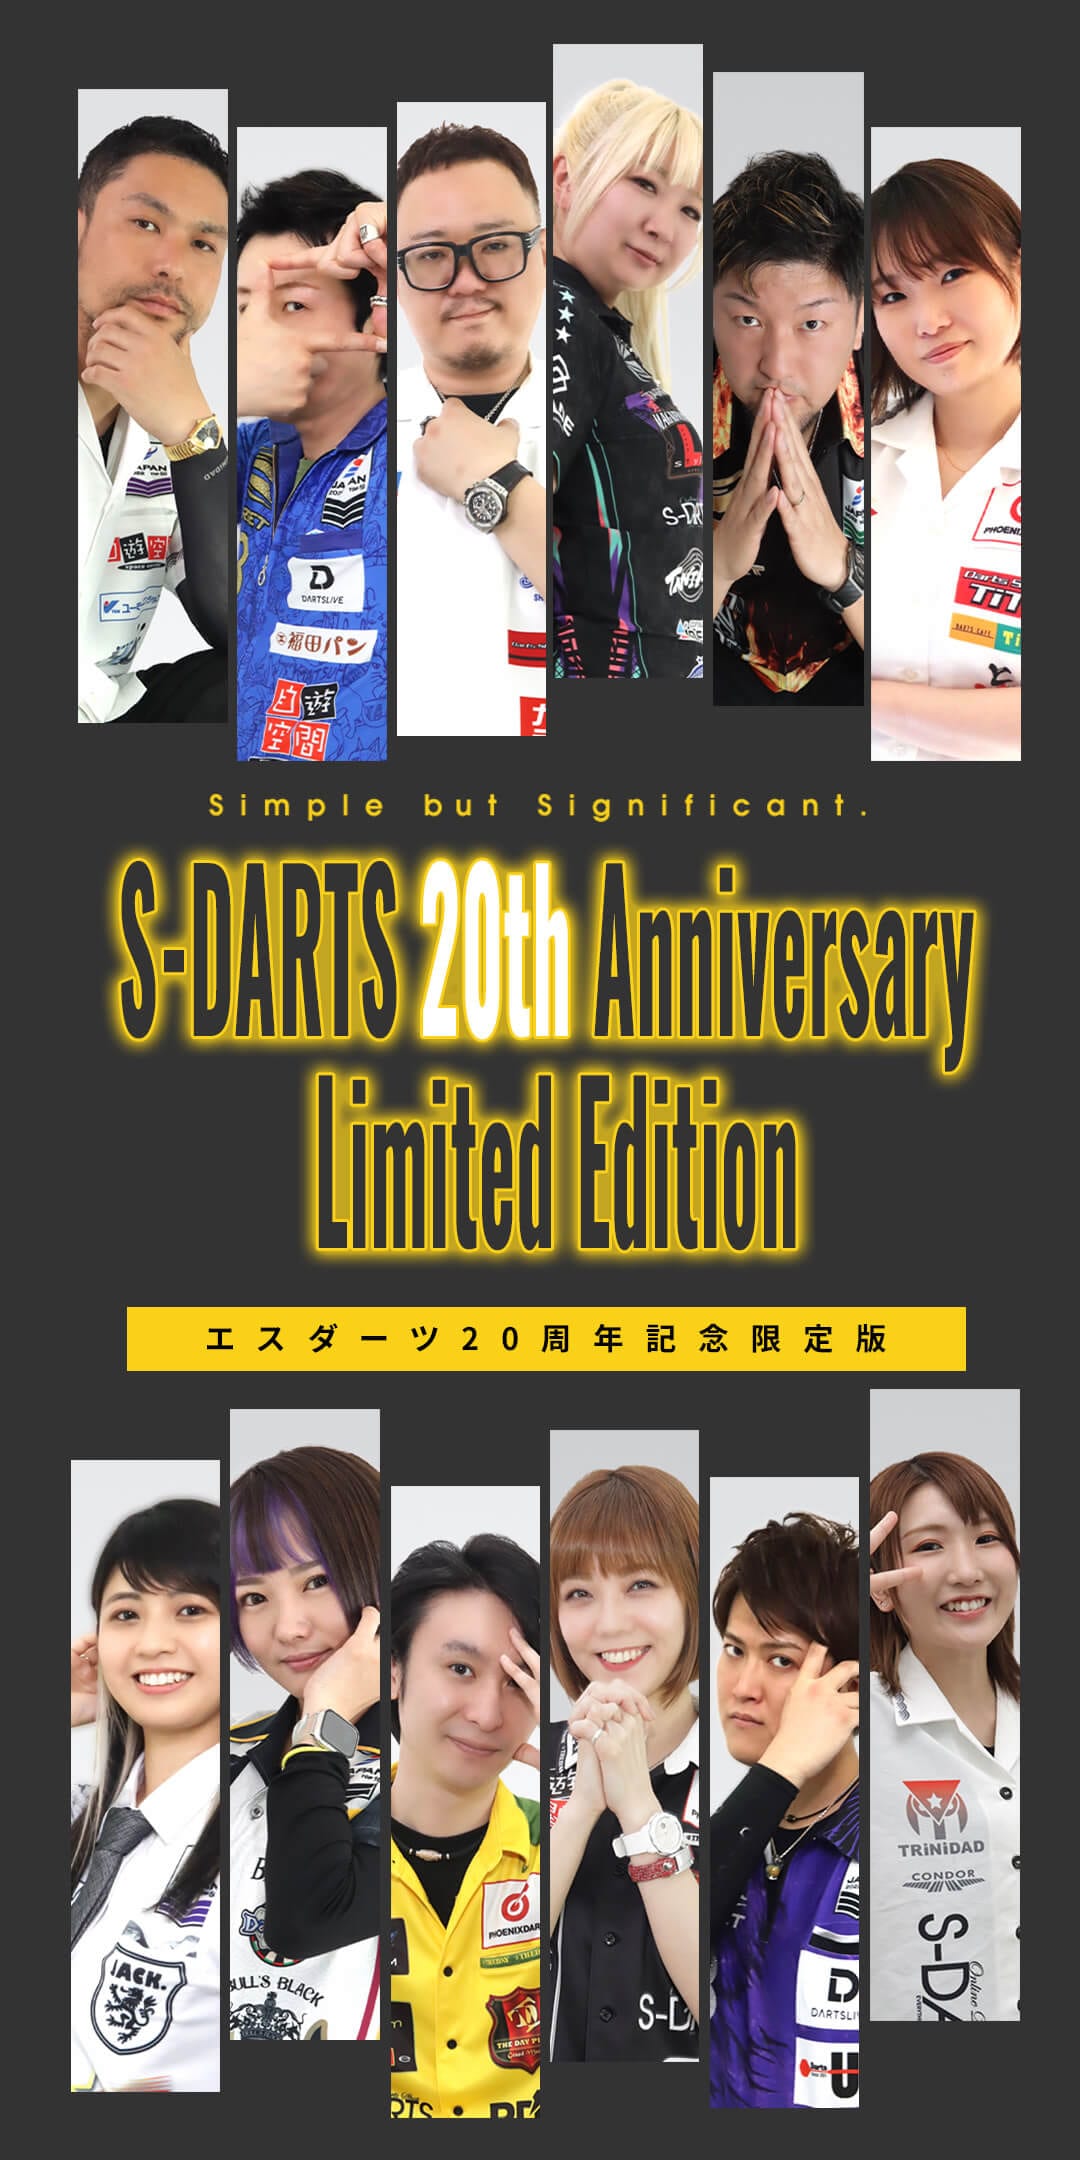 S-DARTS 20th Anniversary Limited Edition